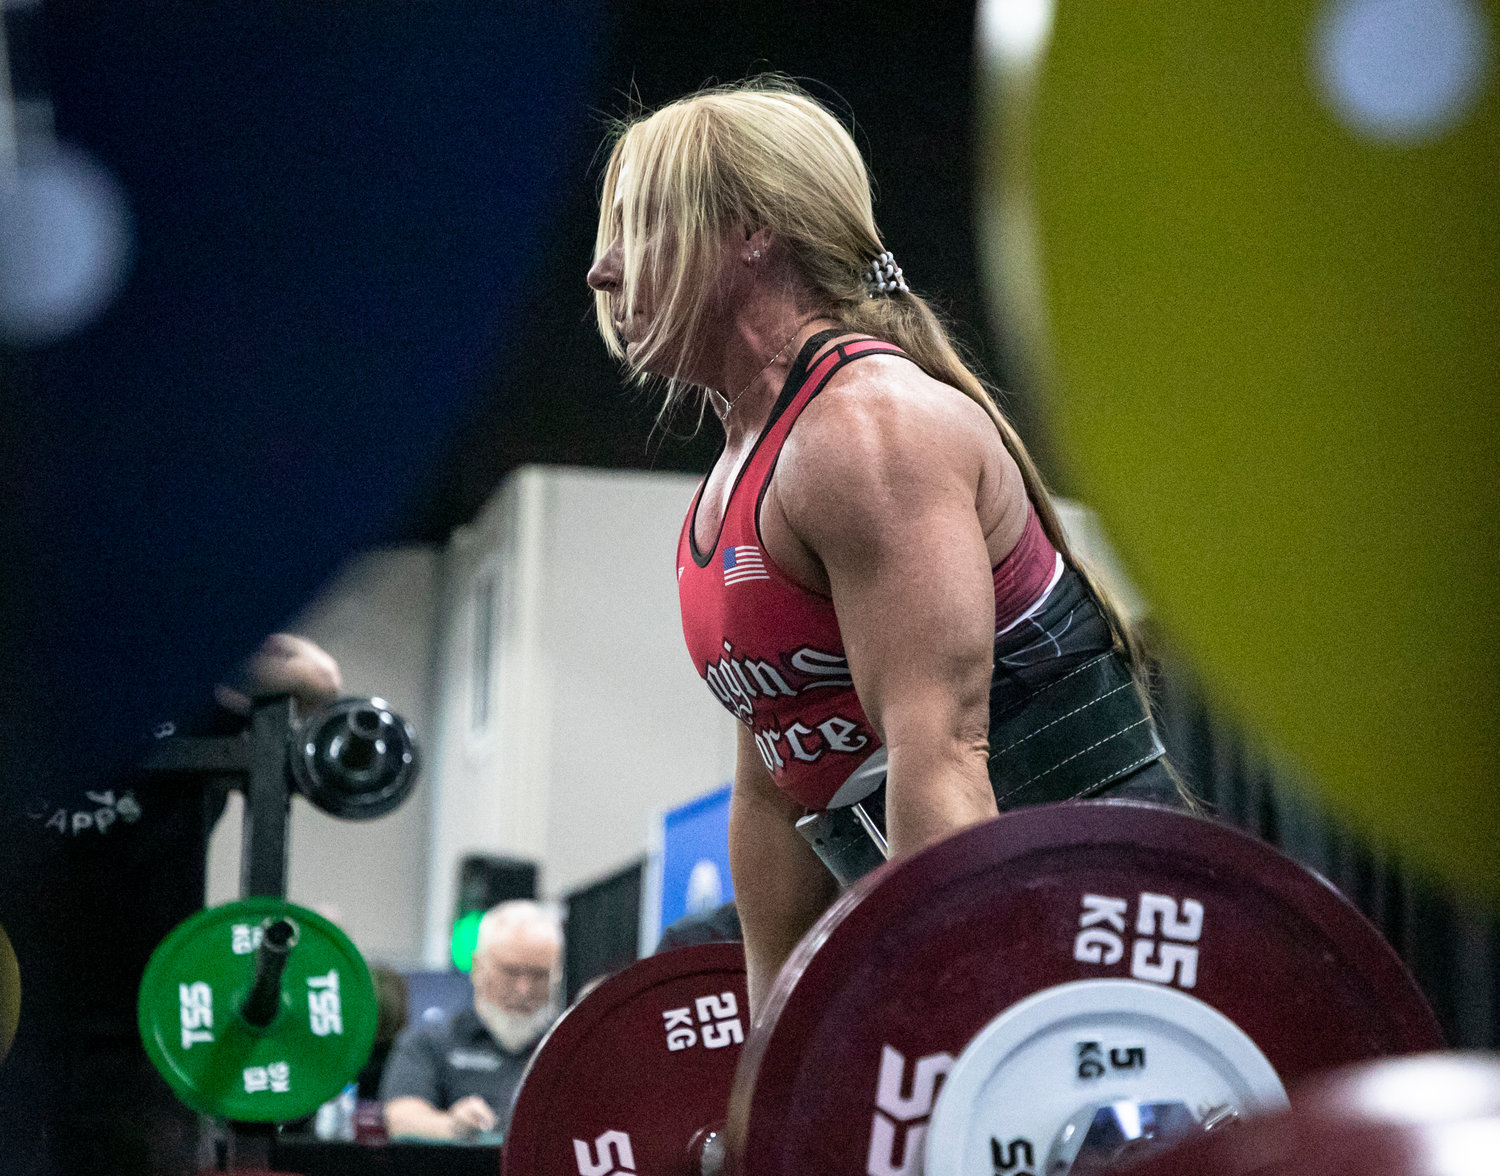 Valerie Smith locks out on a first-attempt deadlift of 407.8 pounds (185 kg) in the final leg of the first day of competition in the IPL World Championships at the Orange Beach Event Center.